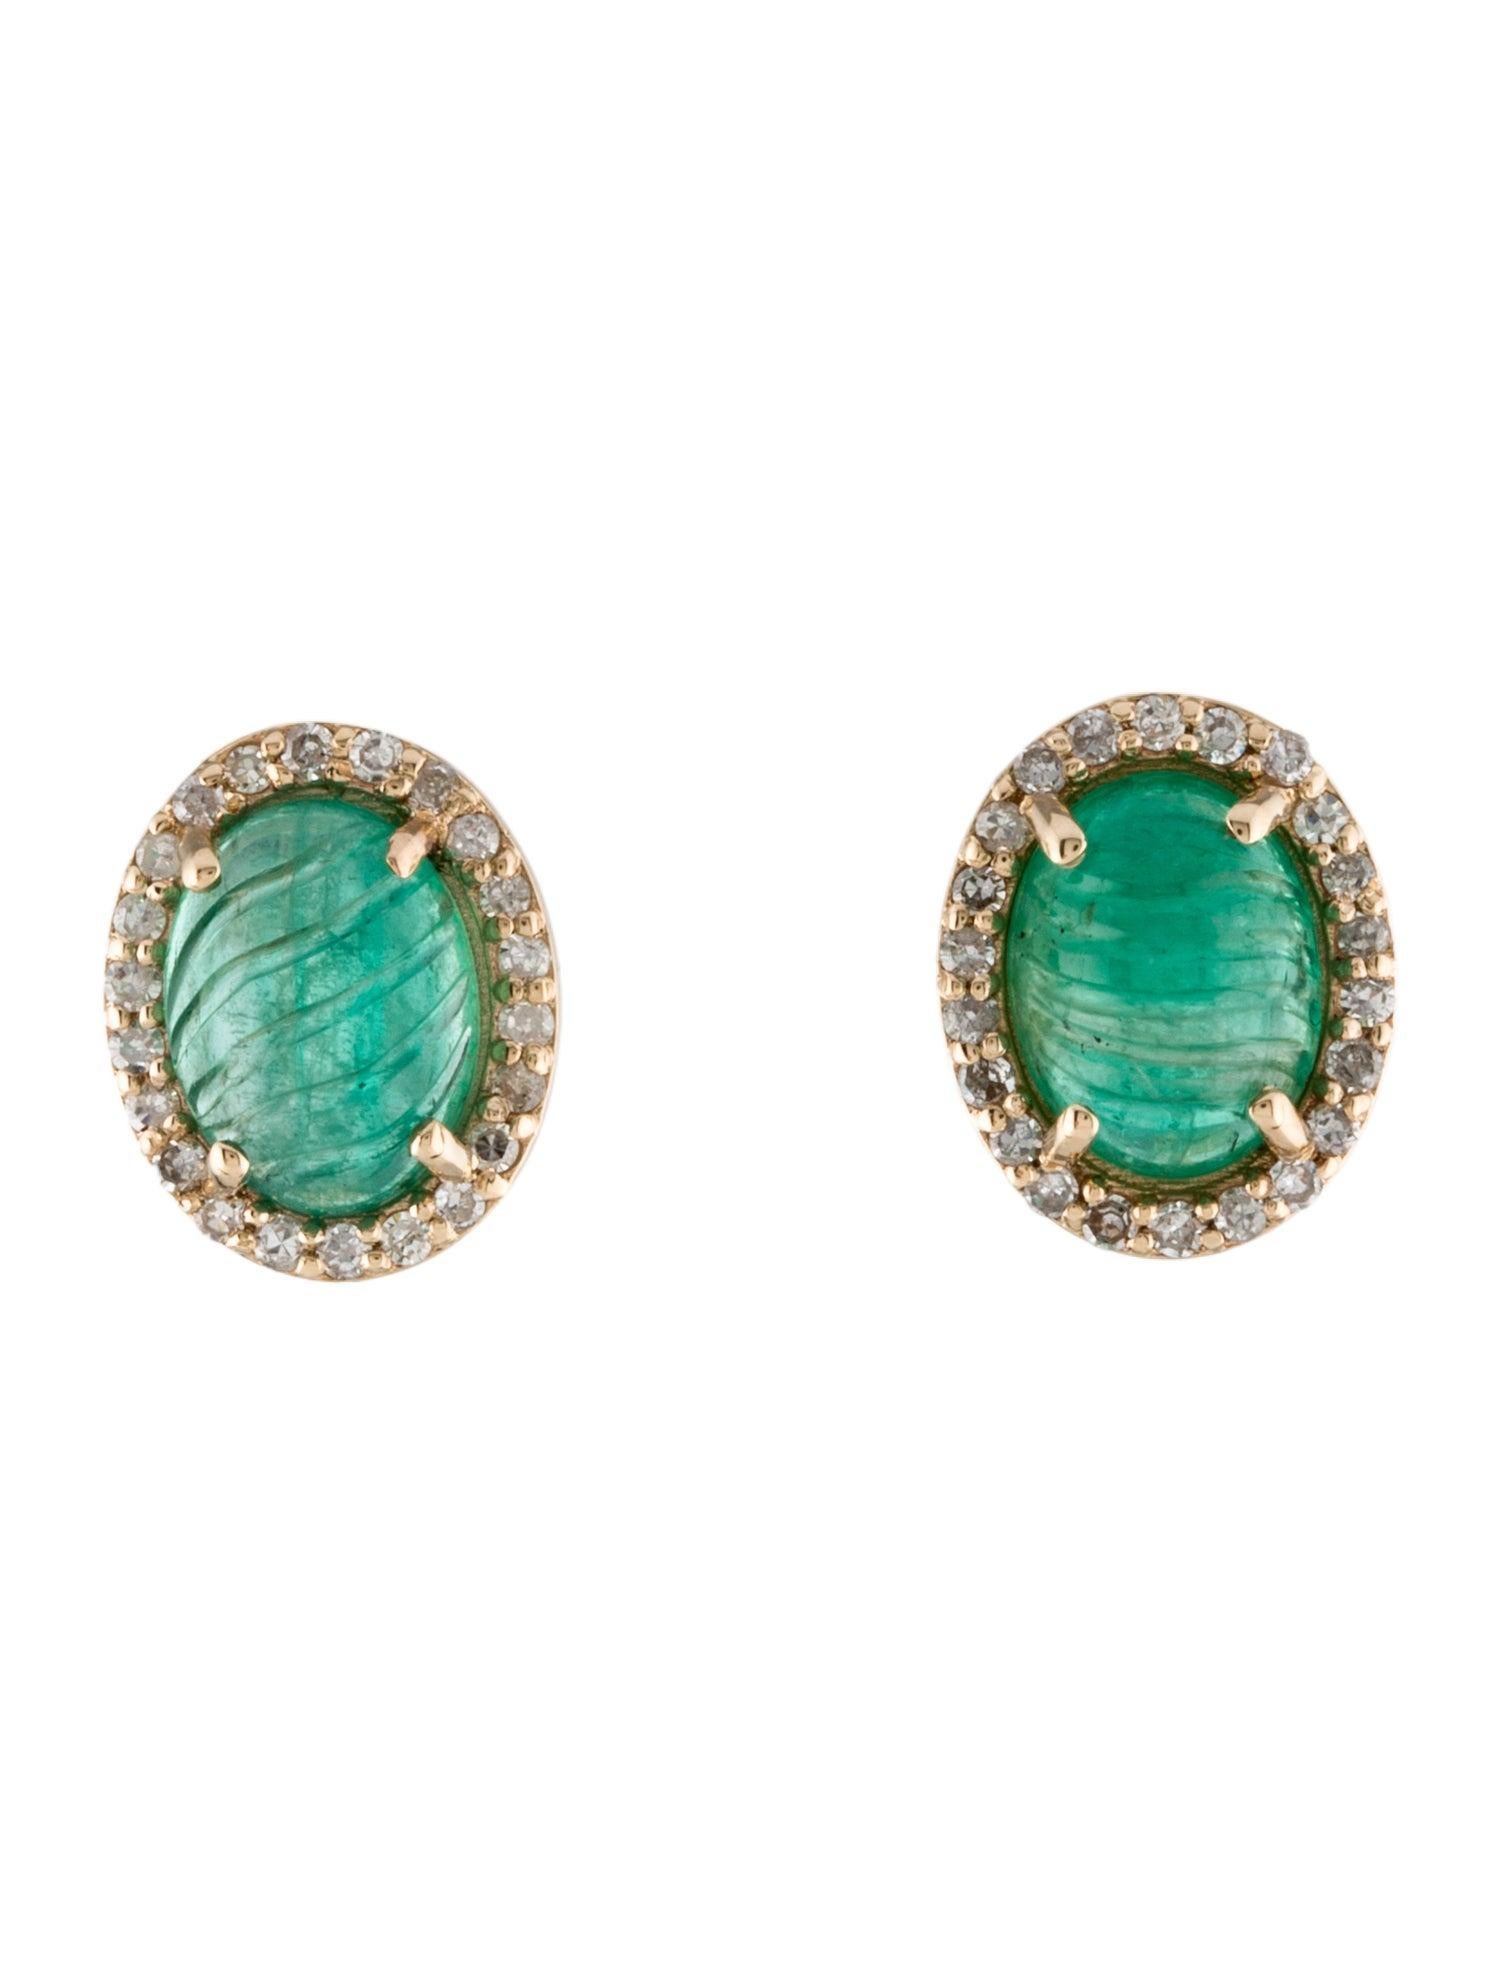 Discover the enchanting allure of our Rhodium-Plated 14K Yellow Gold Stud Earrings, featuring uniquely carved Cabochon Emeralds complemented by a halo of near colorless diamonds. These exquisite earrings blend timeless elegance with modern